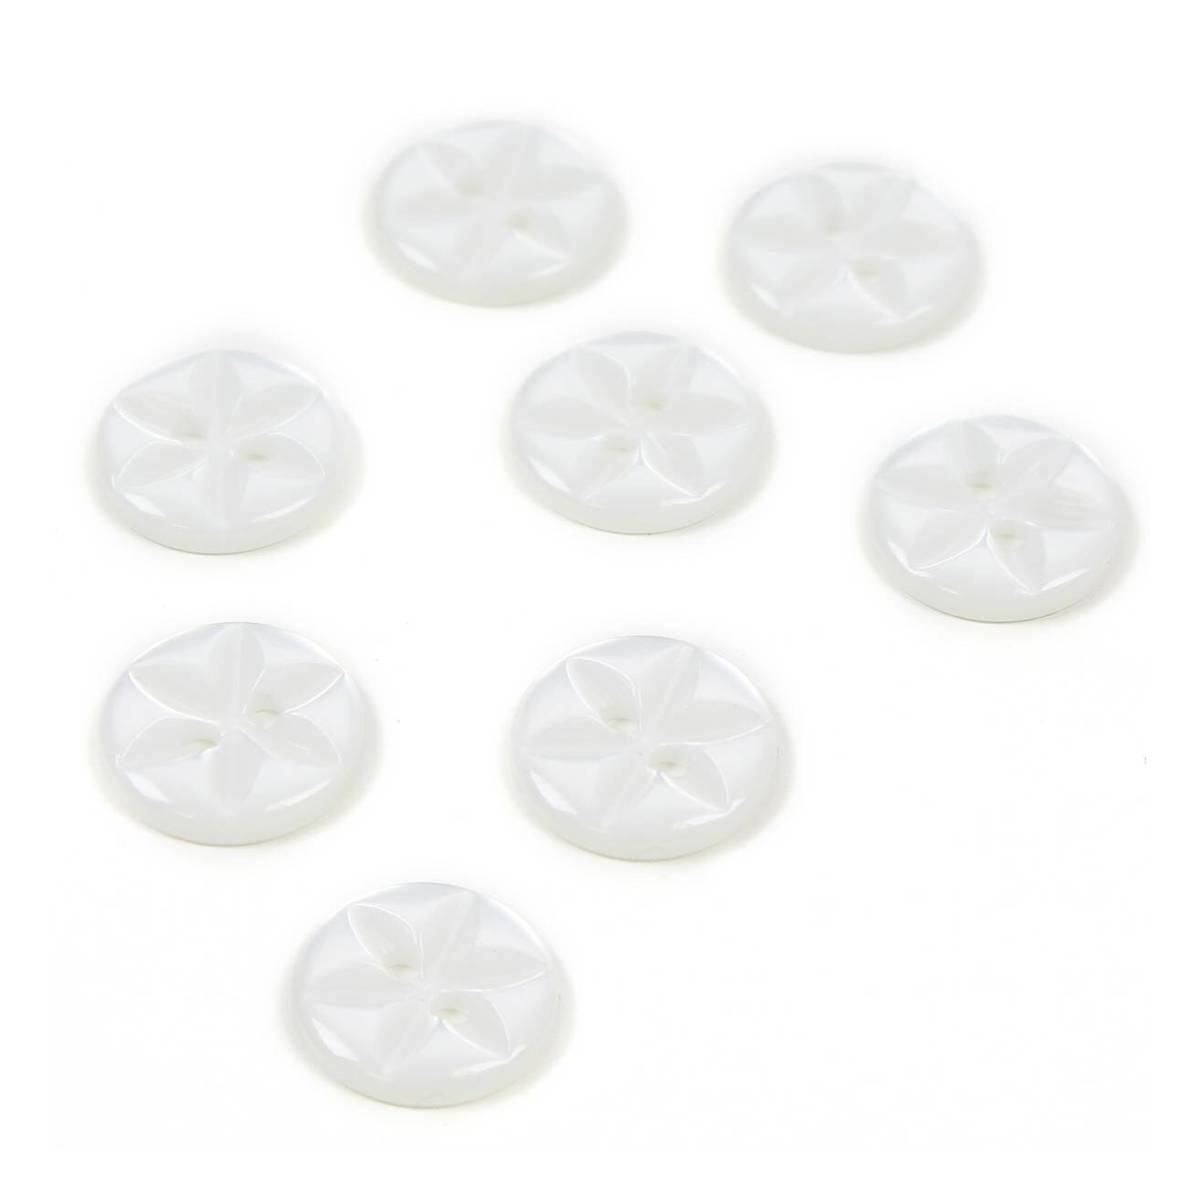 Shank button, White button for kids